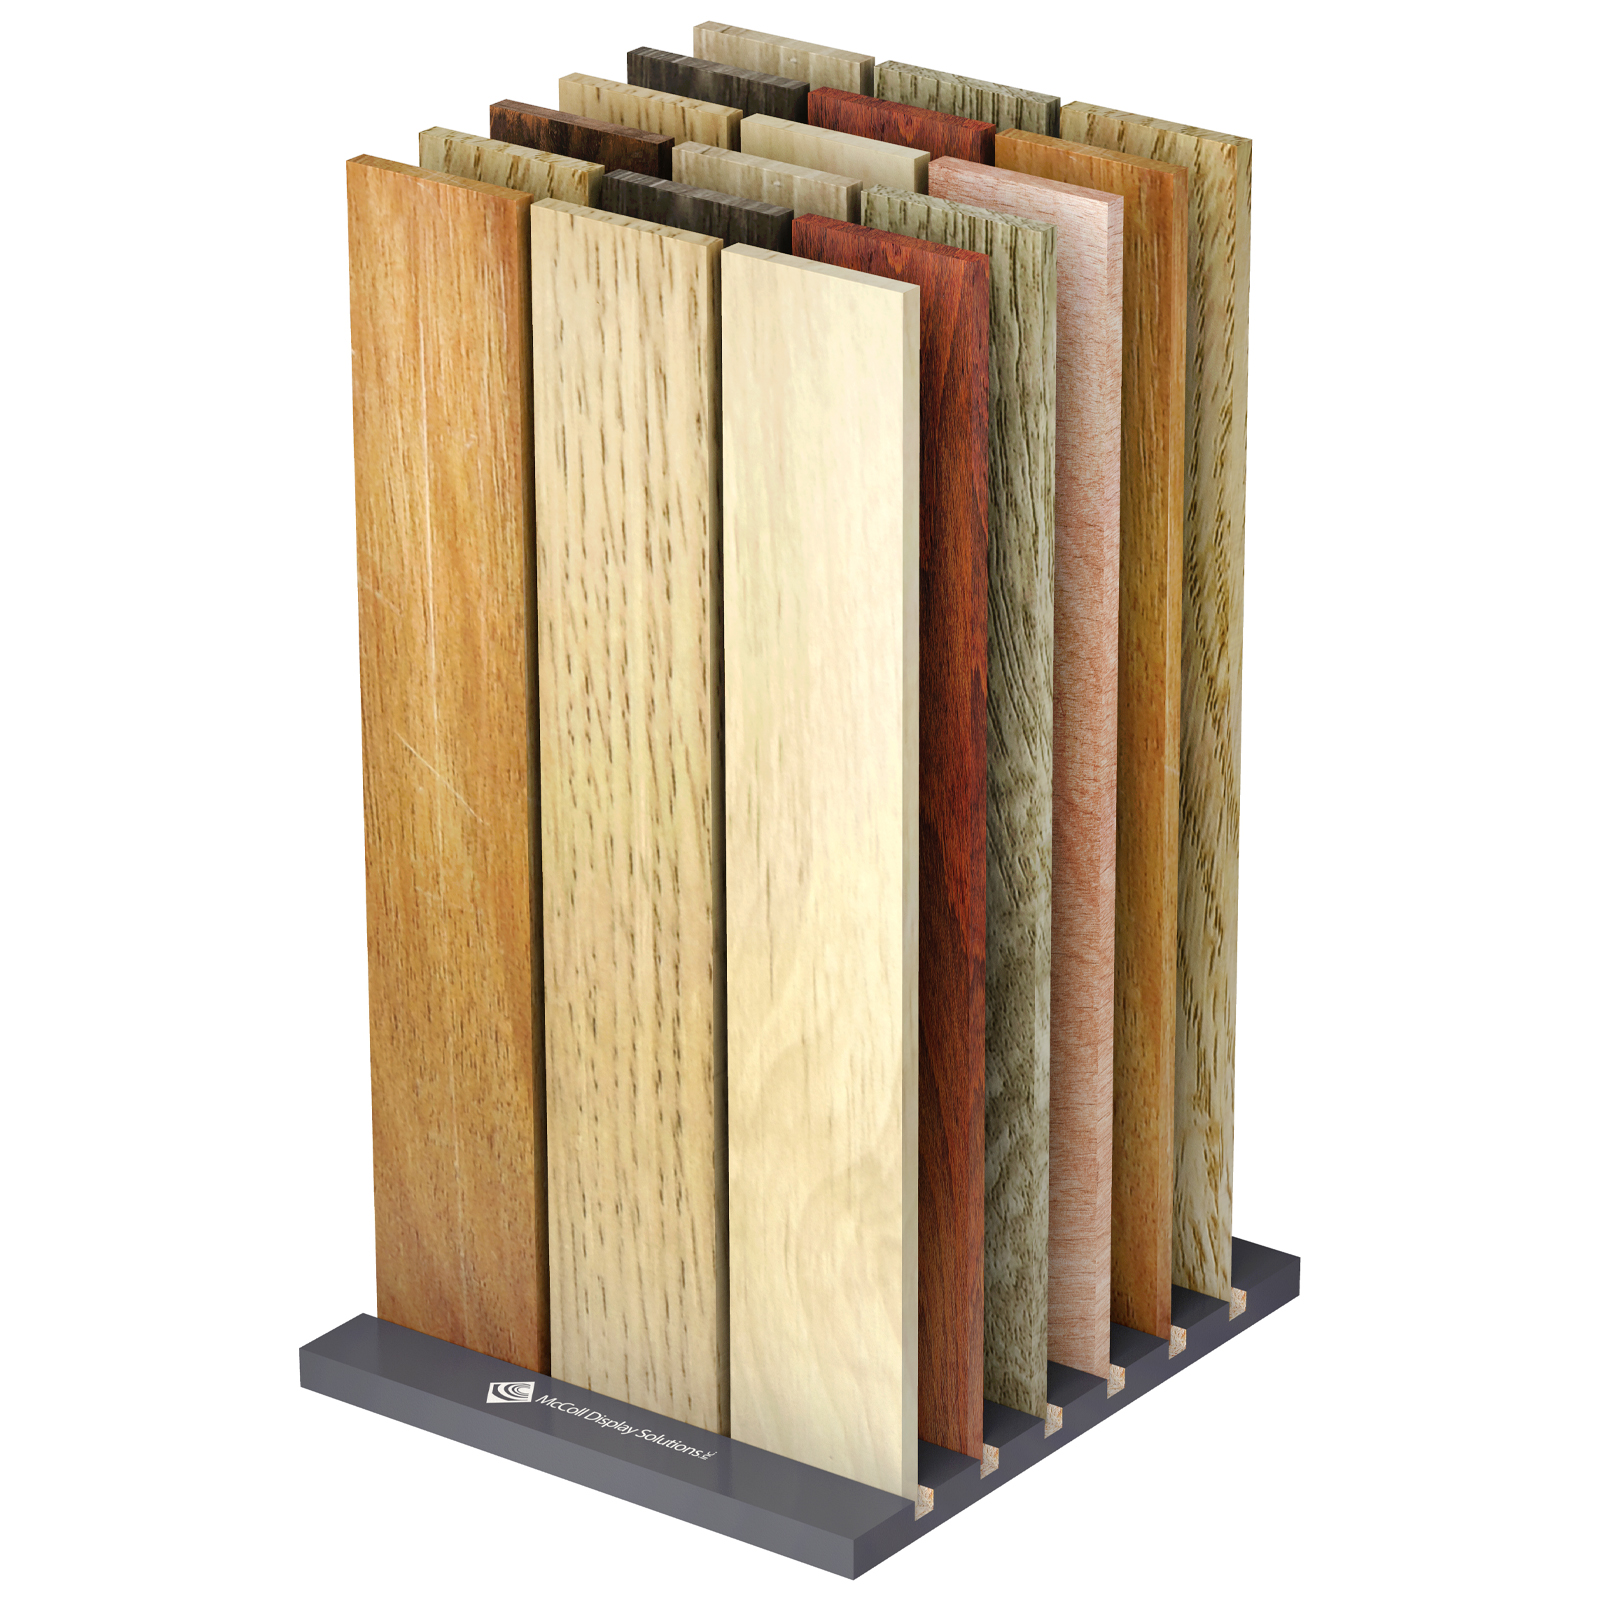 Simple Floor Slab Display for Hardwood Laminate Bamboo Reclaimed Wood Parquet Plank Samples Fully Customizable and Economical